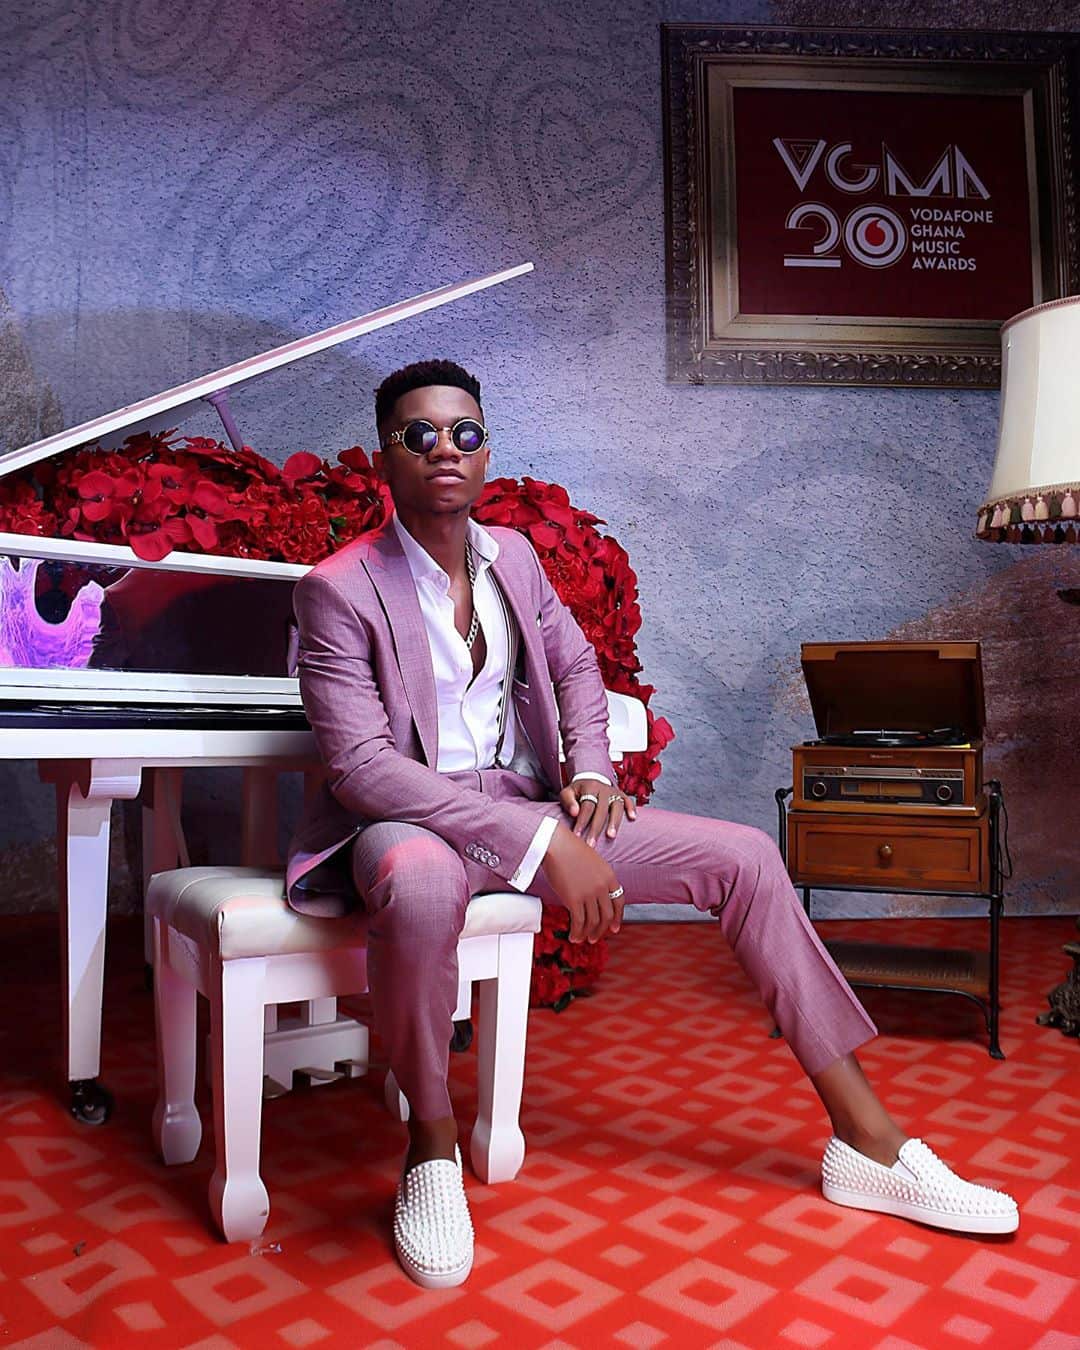 Here are the best dressed celebrities at the VGMA 2019